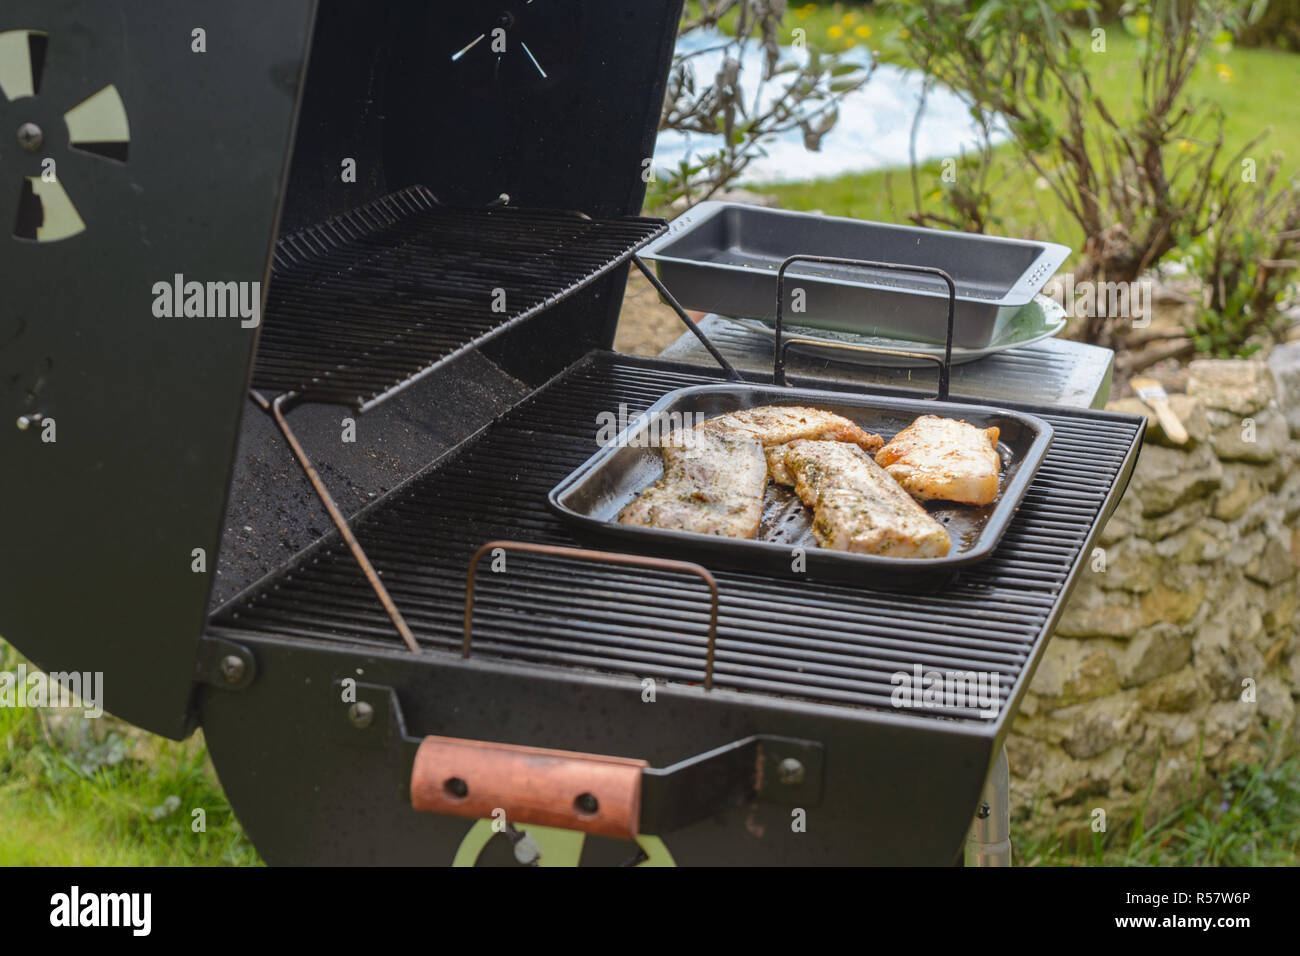 Grillschale High Resolution Stock Photography and Images - Alamy